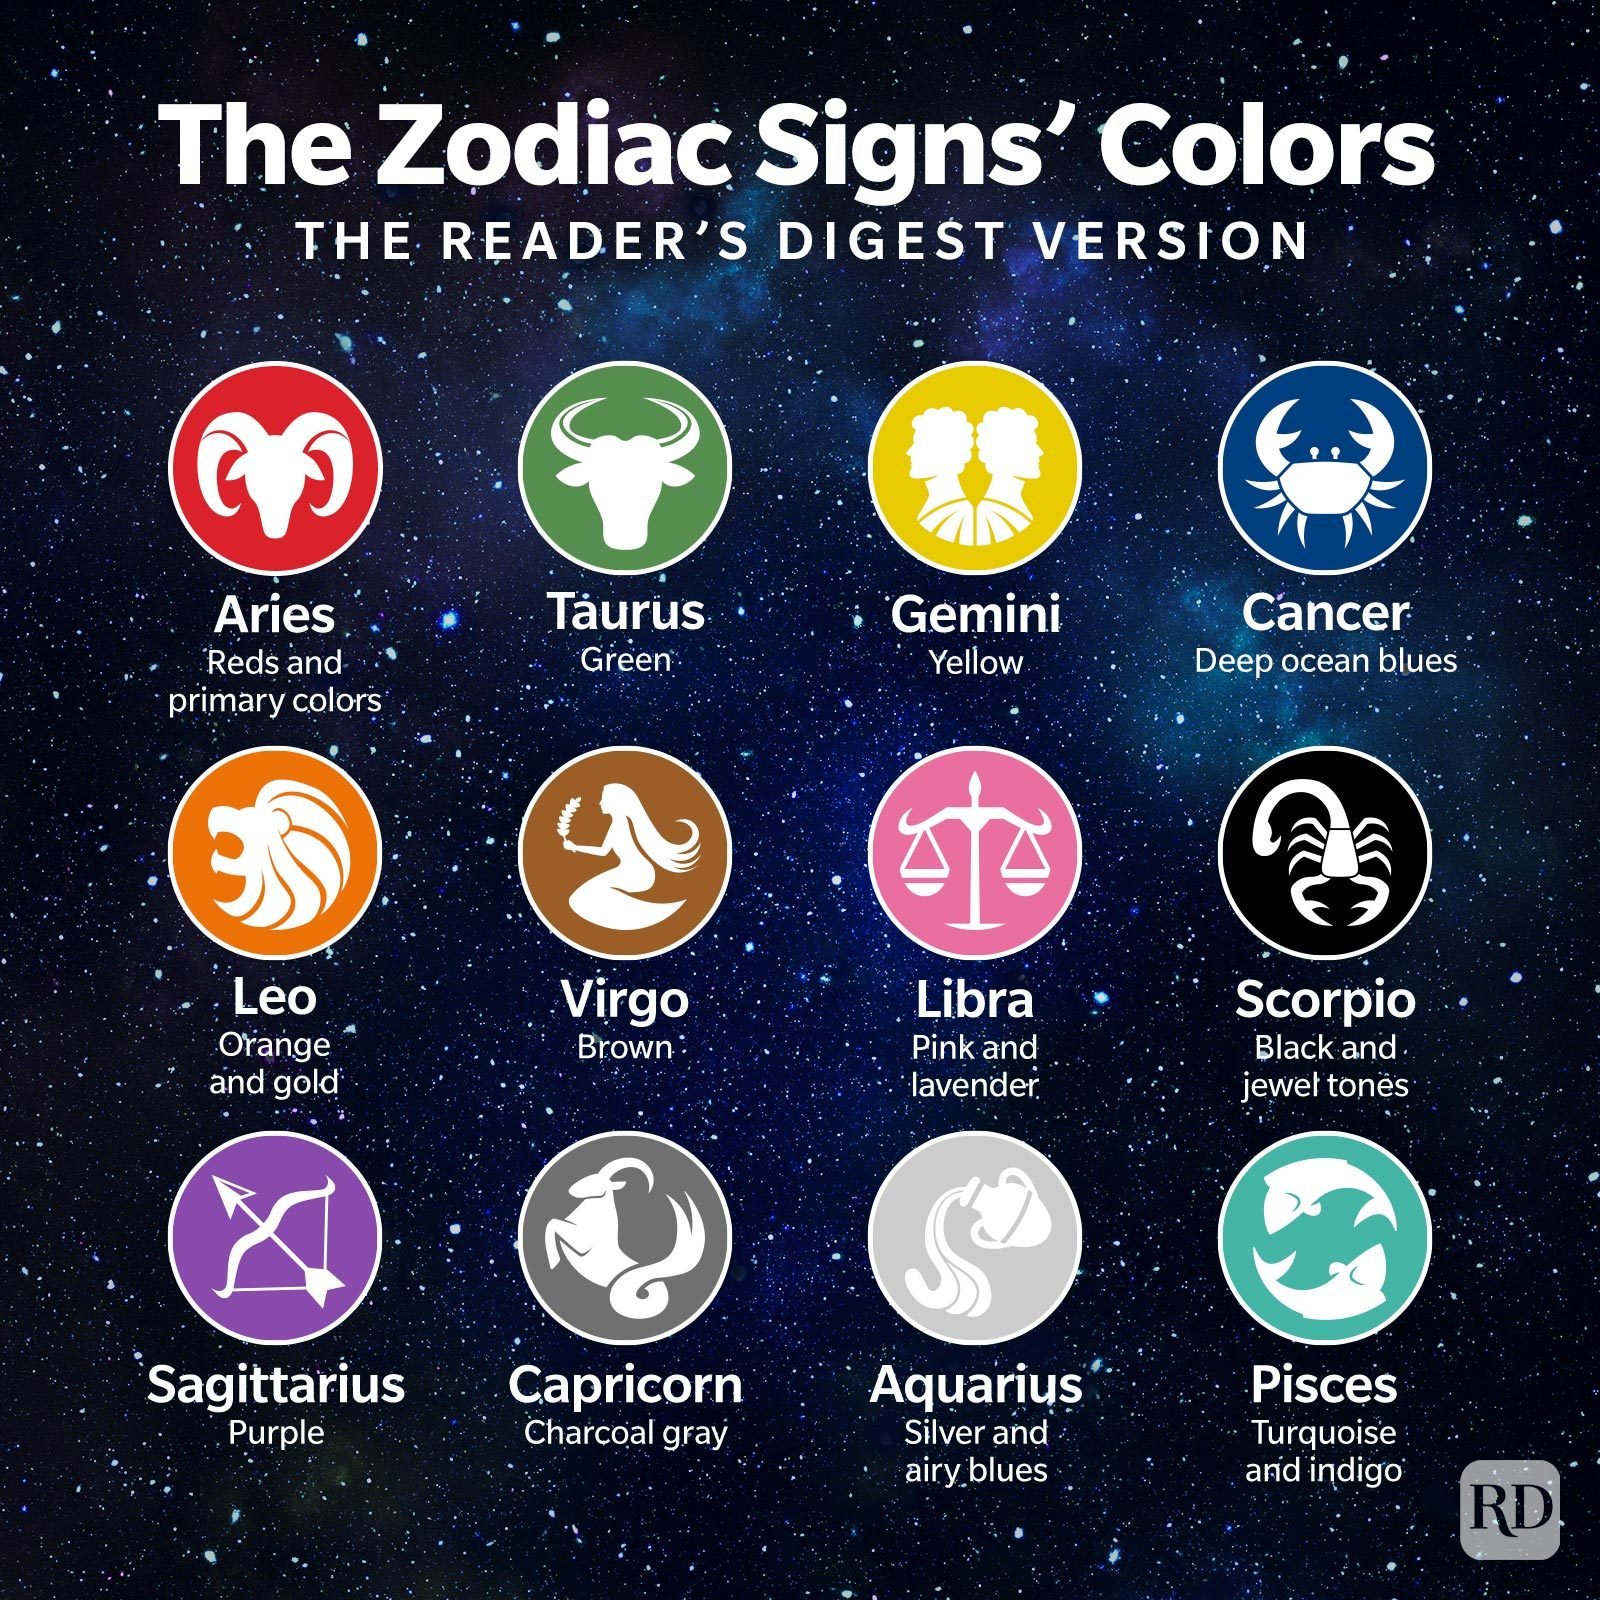 Zodiac Signs Colors Signs with Description Infographic on multicolored galaxy background